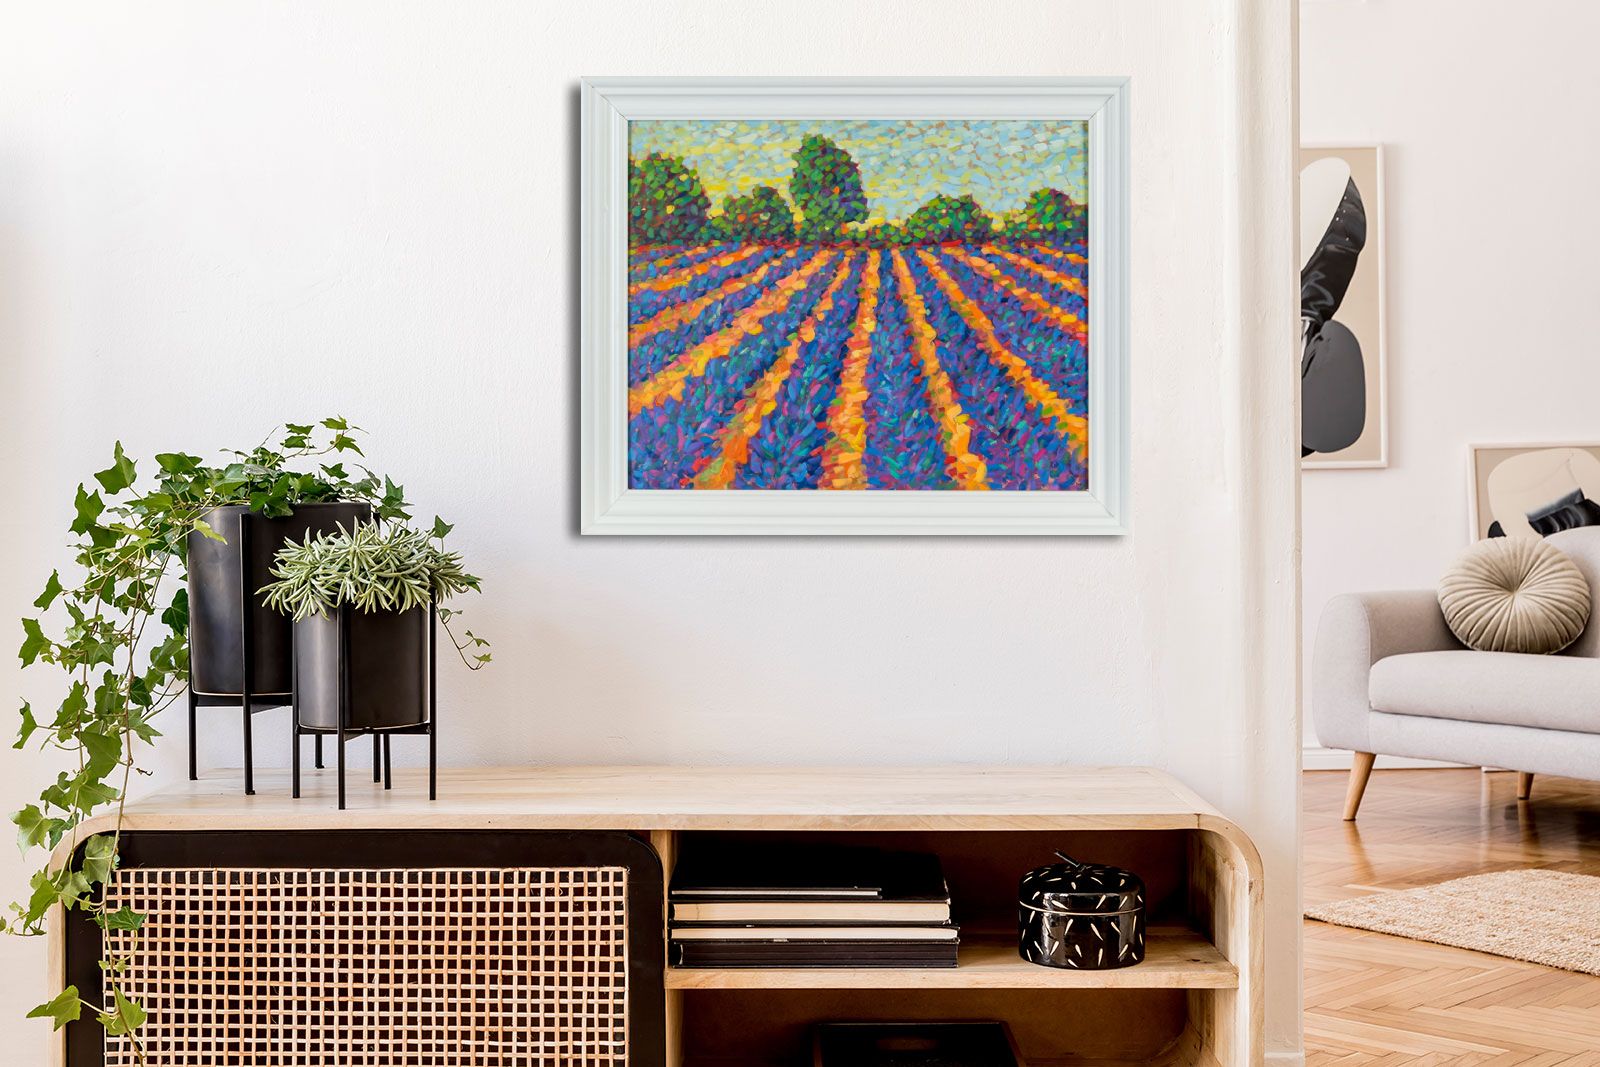 LAVENDER FIELD by Paul Stephens at Ross's Online Art Auctions